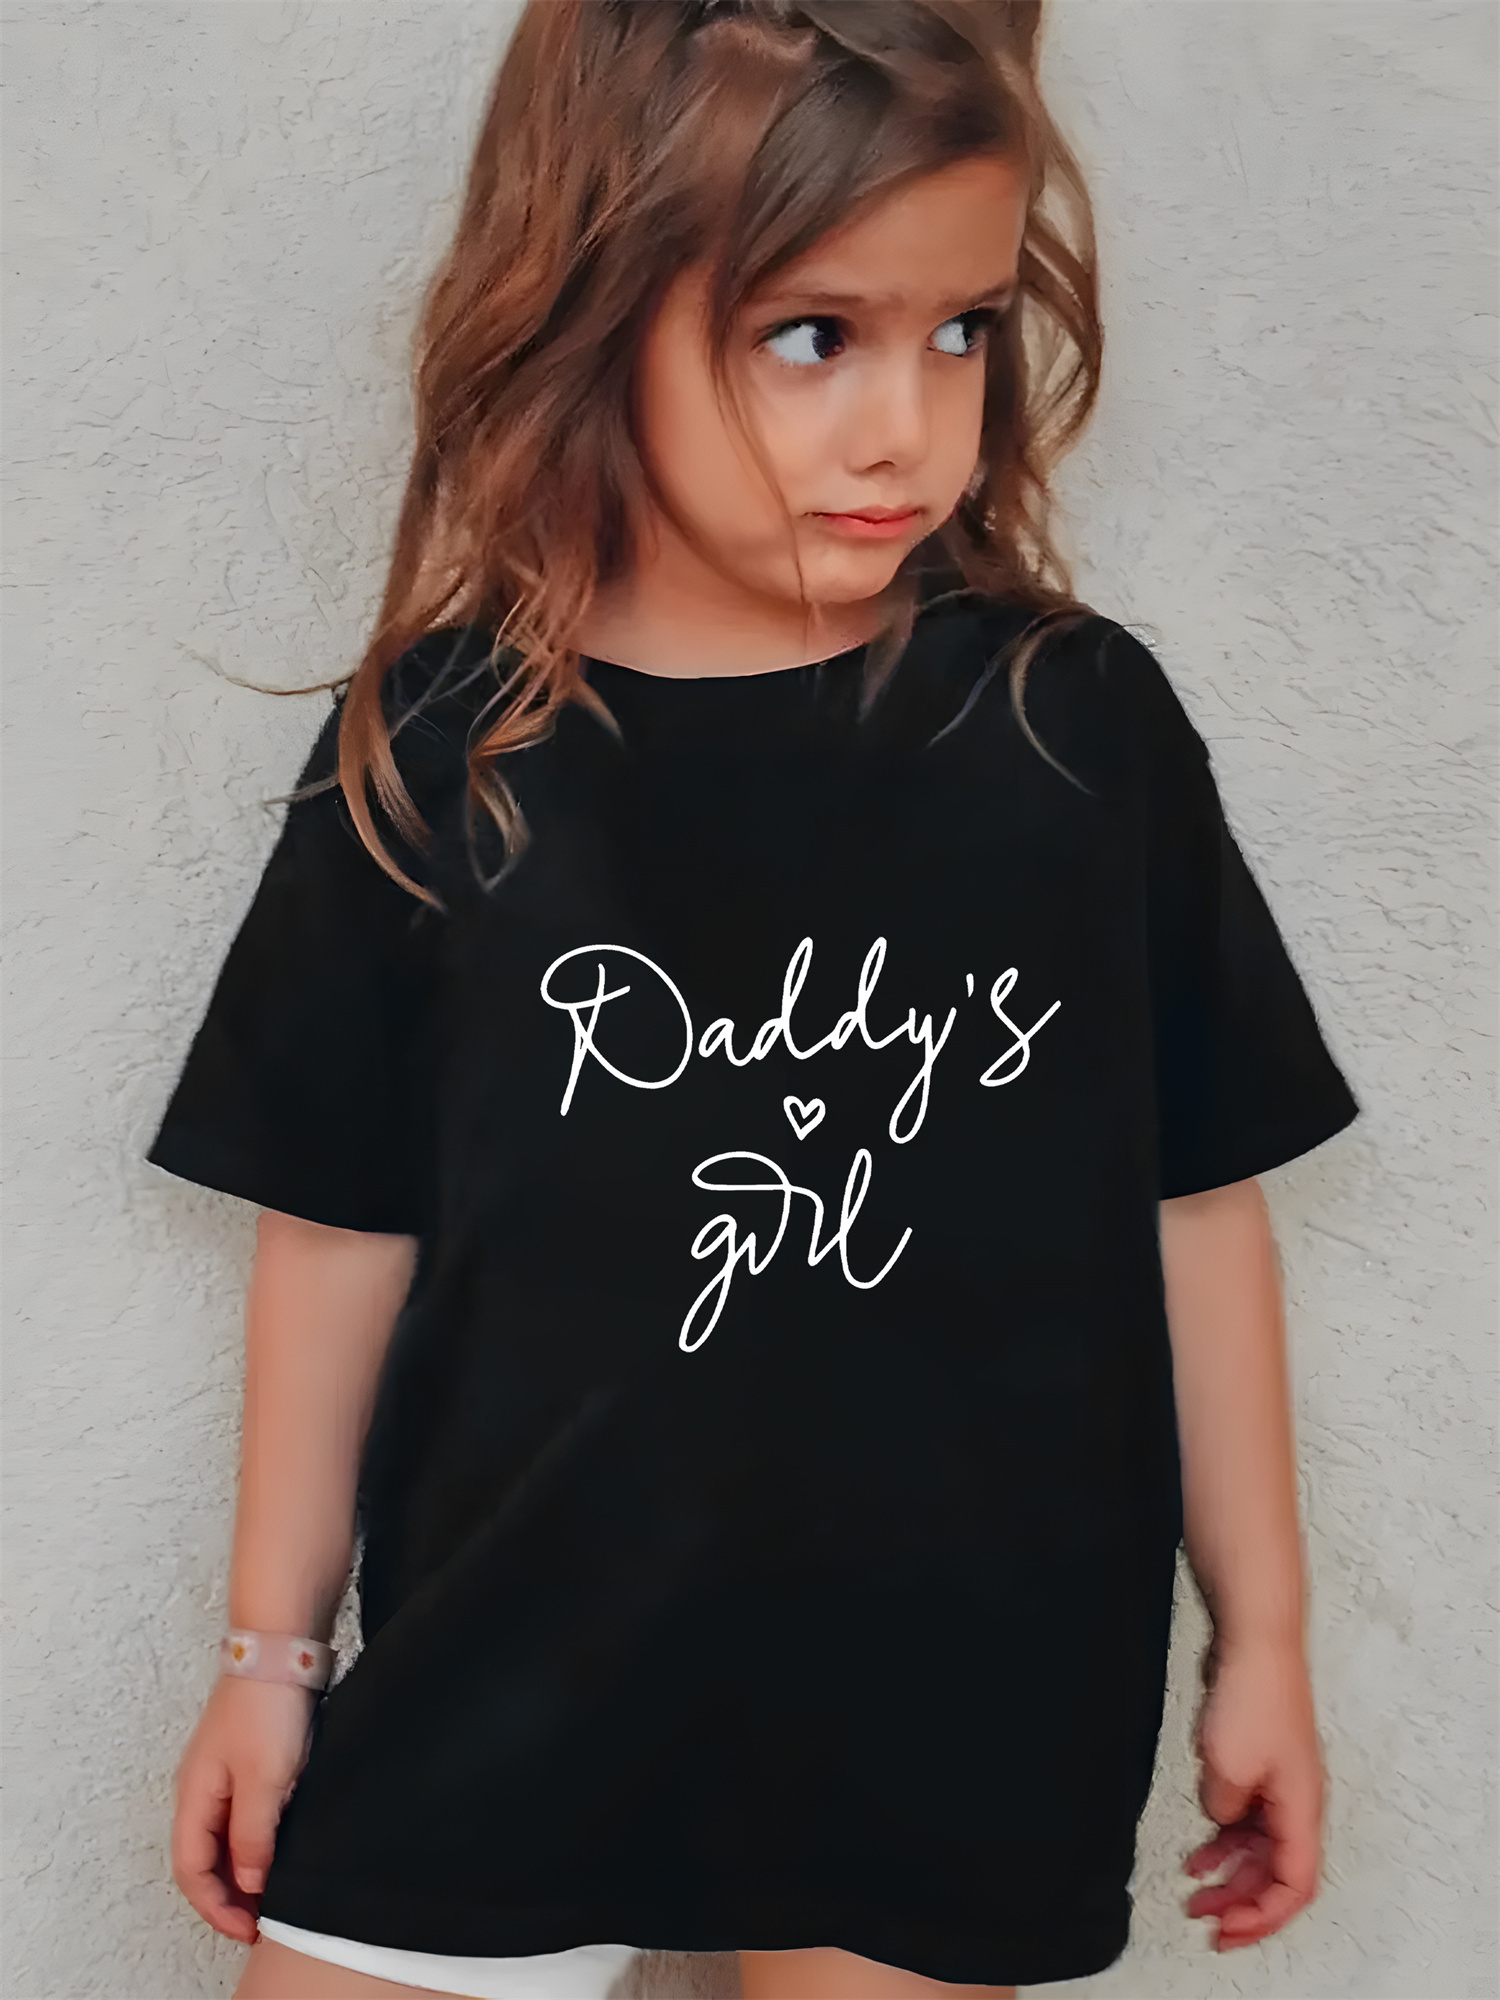 Daddy 01 Daddy's Girl 02, Father & Daughter Shirts